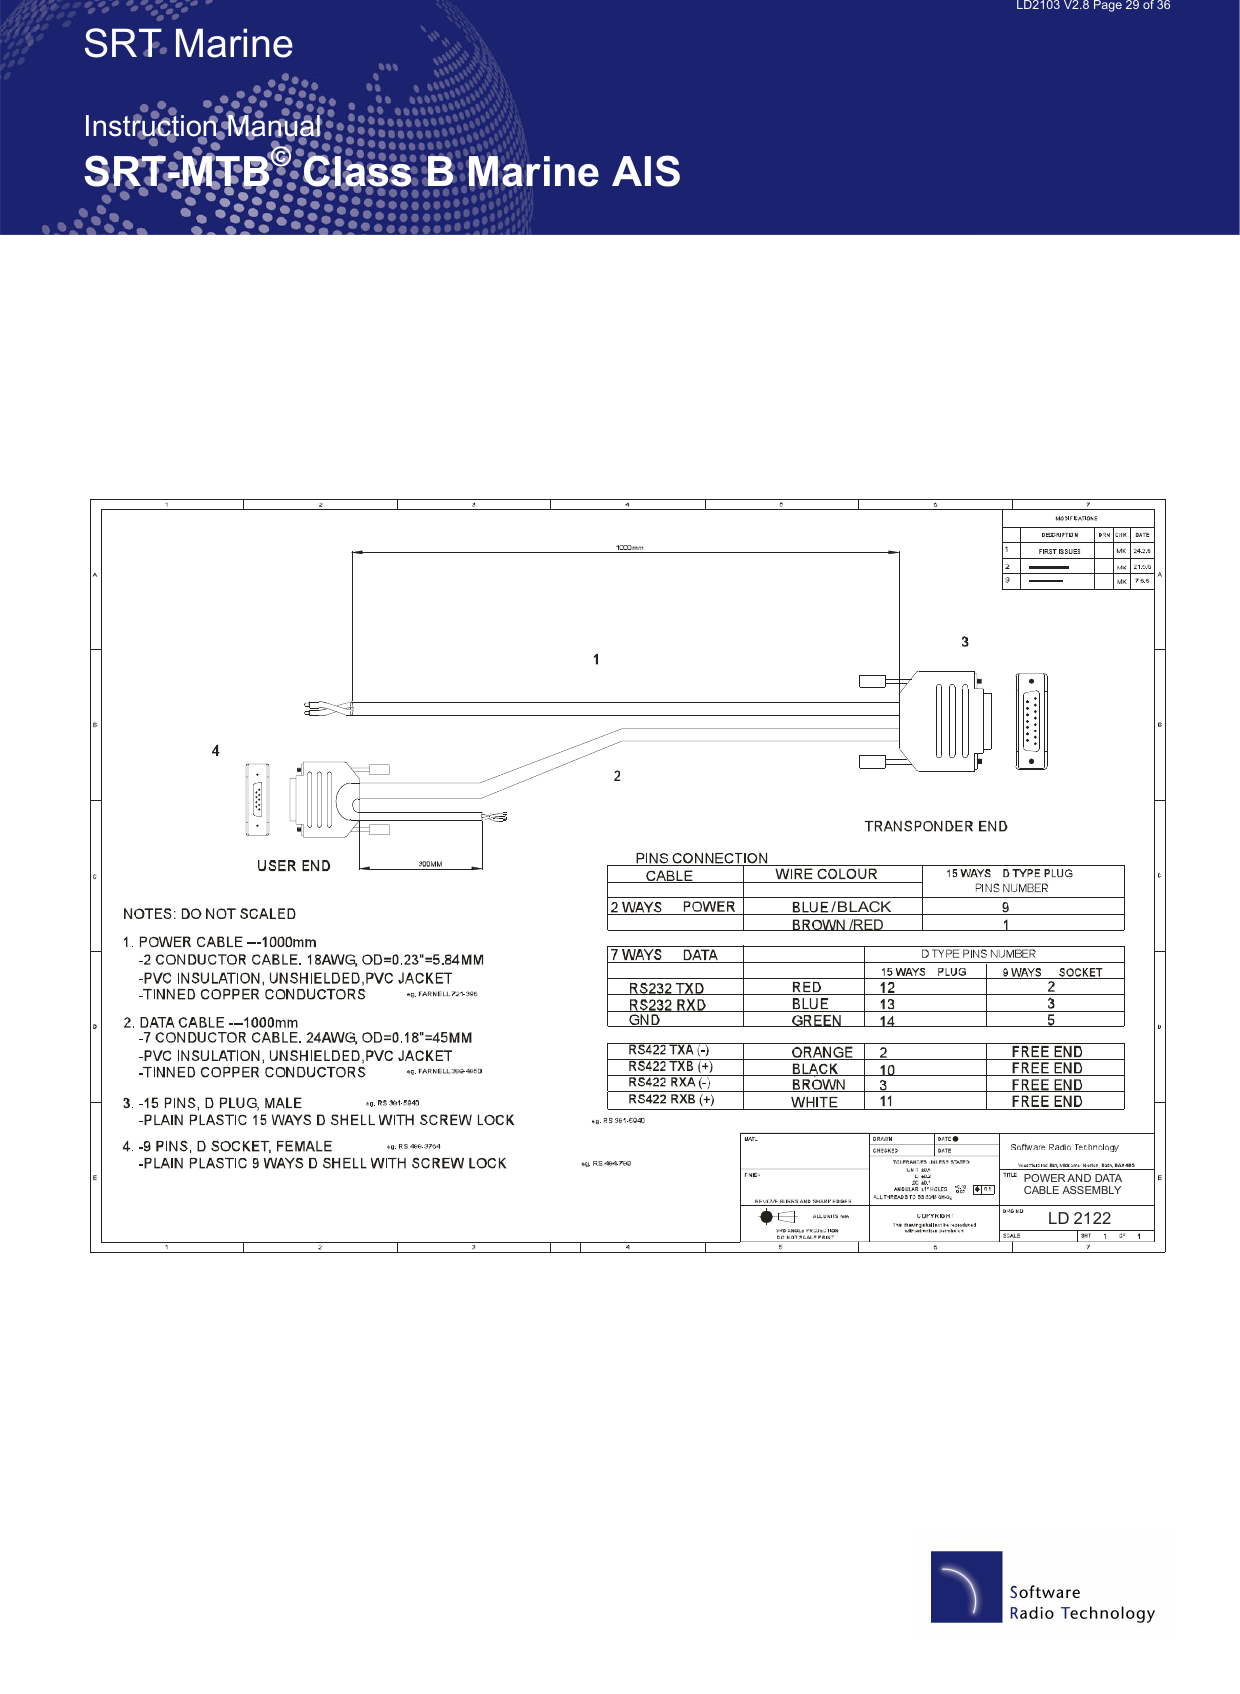   LD2103 V2.8 Page 29 of 36 SRT Marine  Instruction Manual SRT-MTB© Class B Marine AIS      POWER AND DATACABLE ASSEMBLYLD 2122/BLACK/RED 